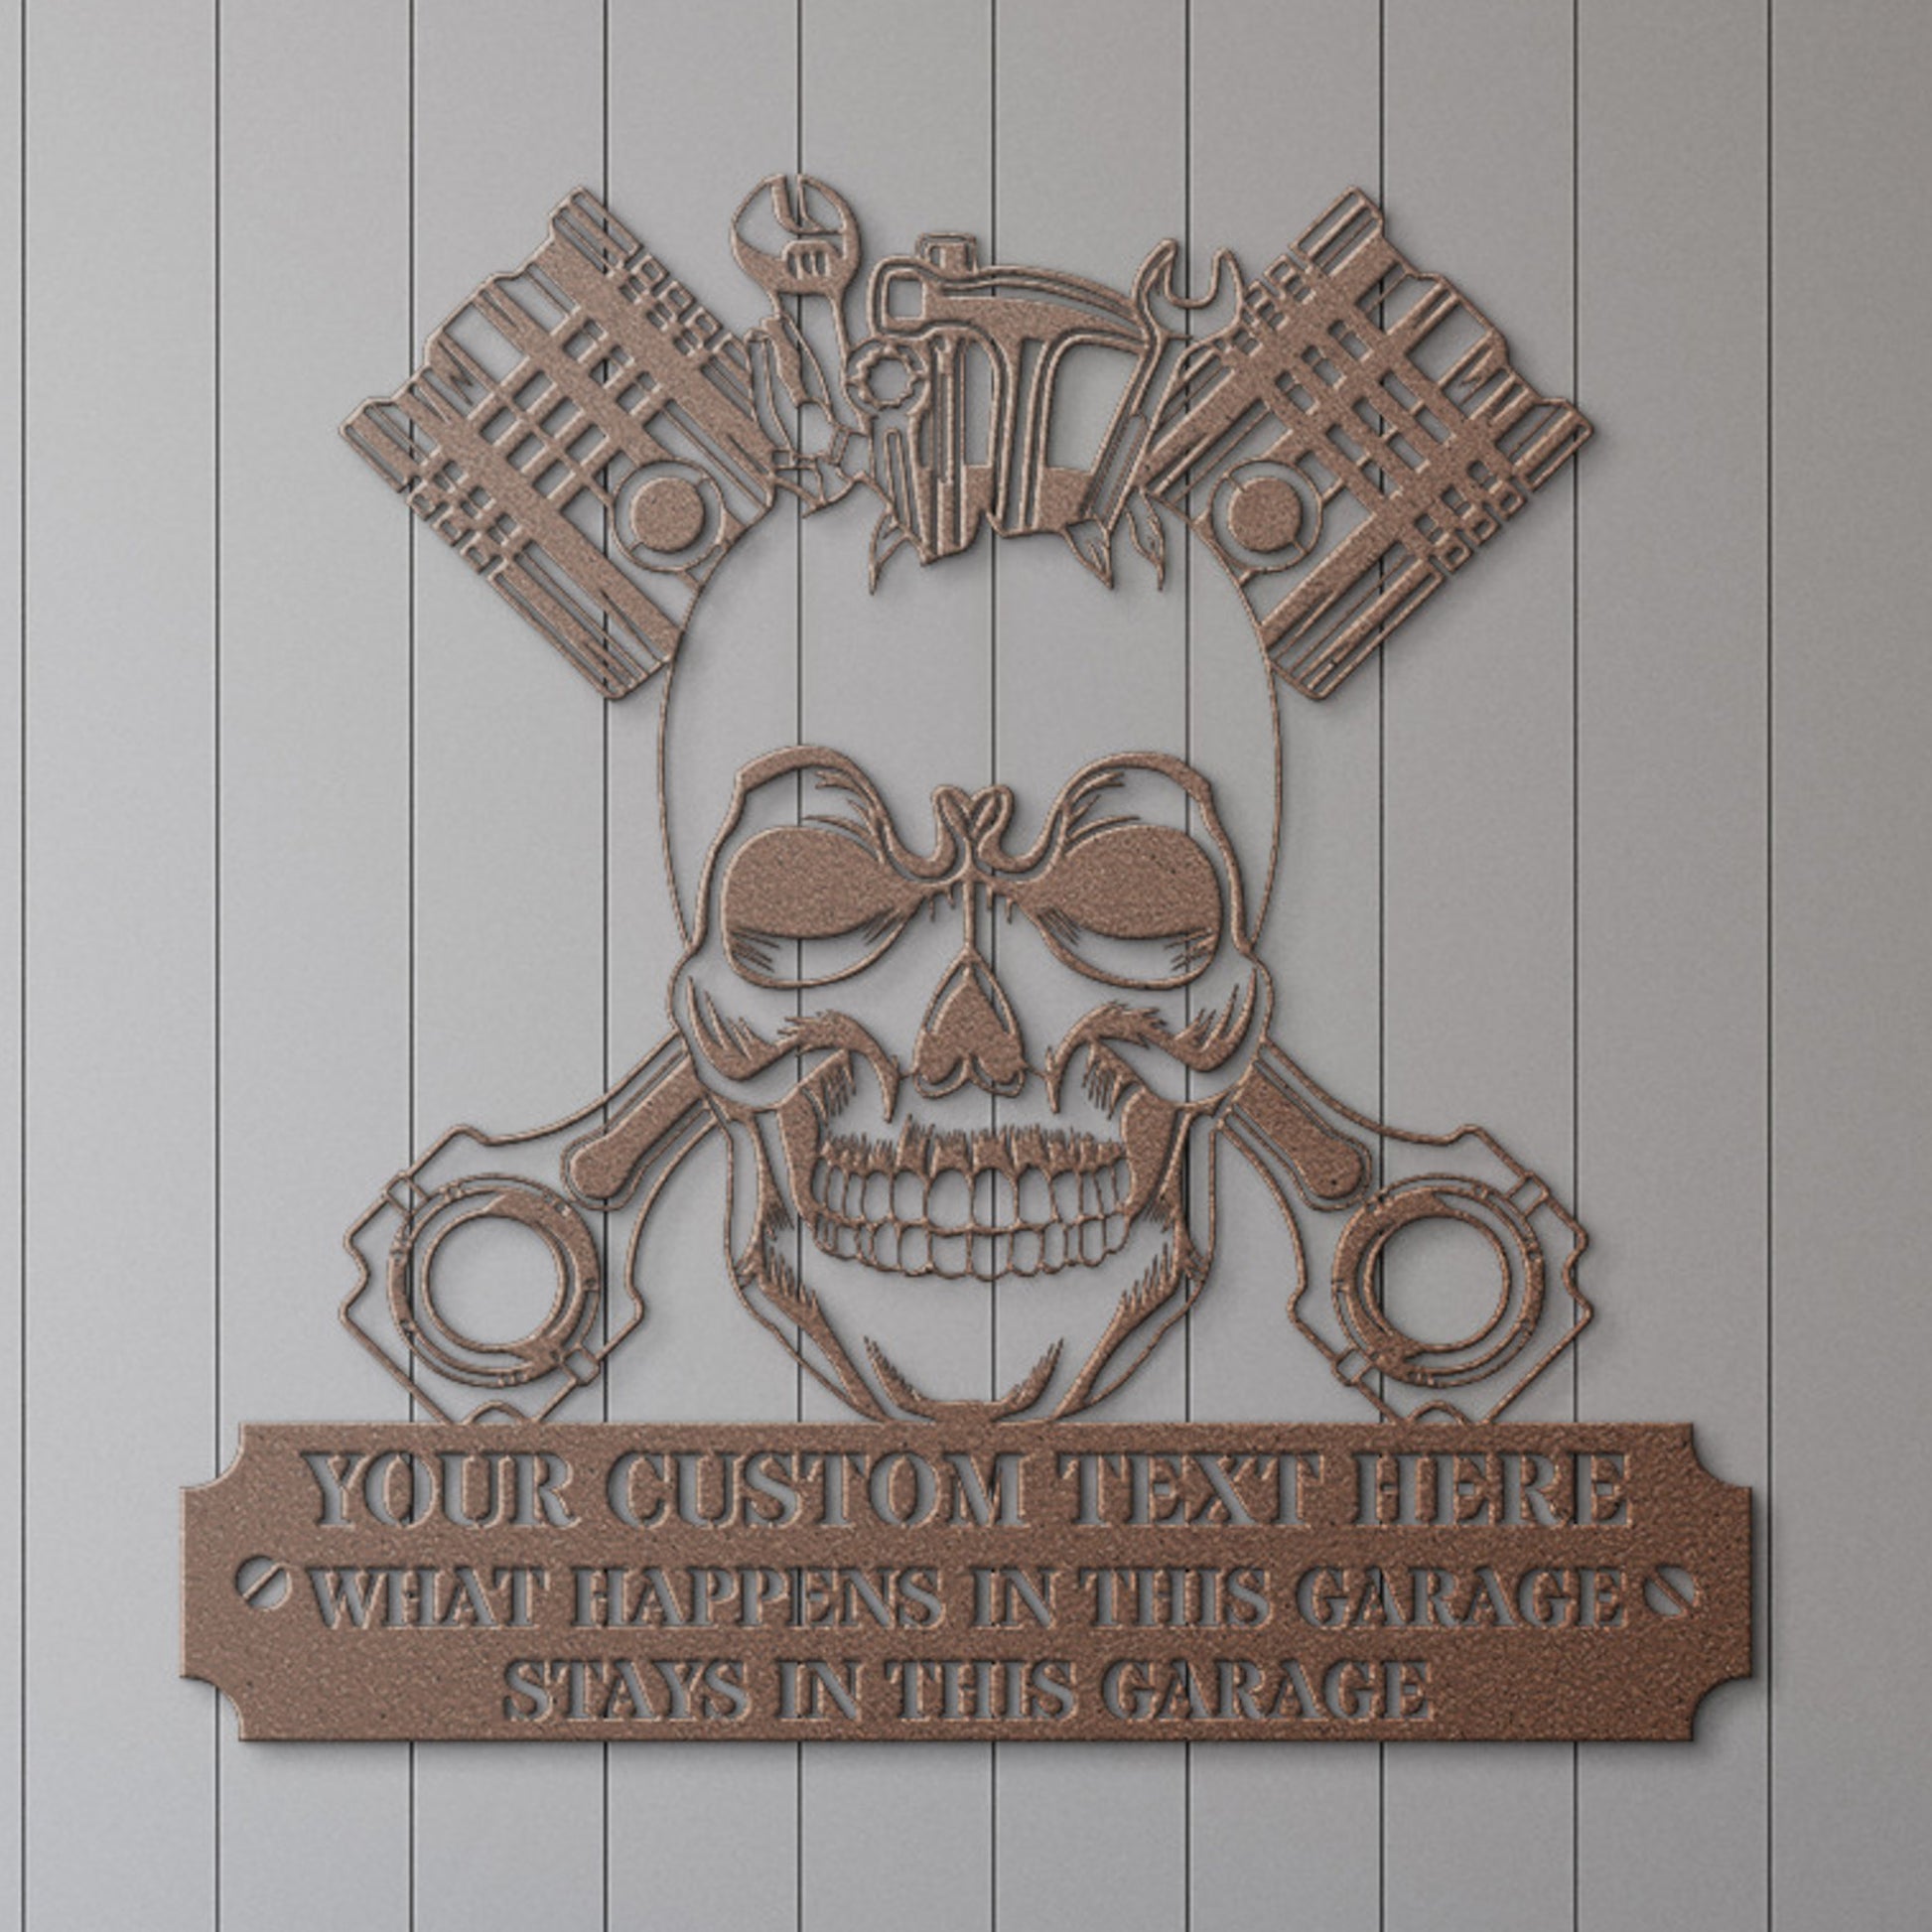 Personalized Garage Tools Name Metal Sign Gift. Personal Man Cave Sign. Custom Mechanic Sign Gift. Skull Wall Hanging. Unique Garage Decor